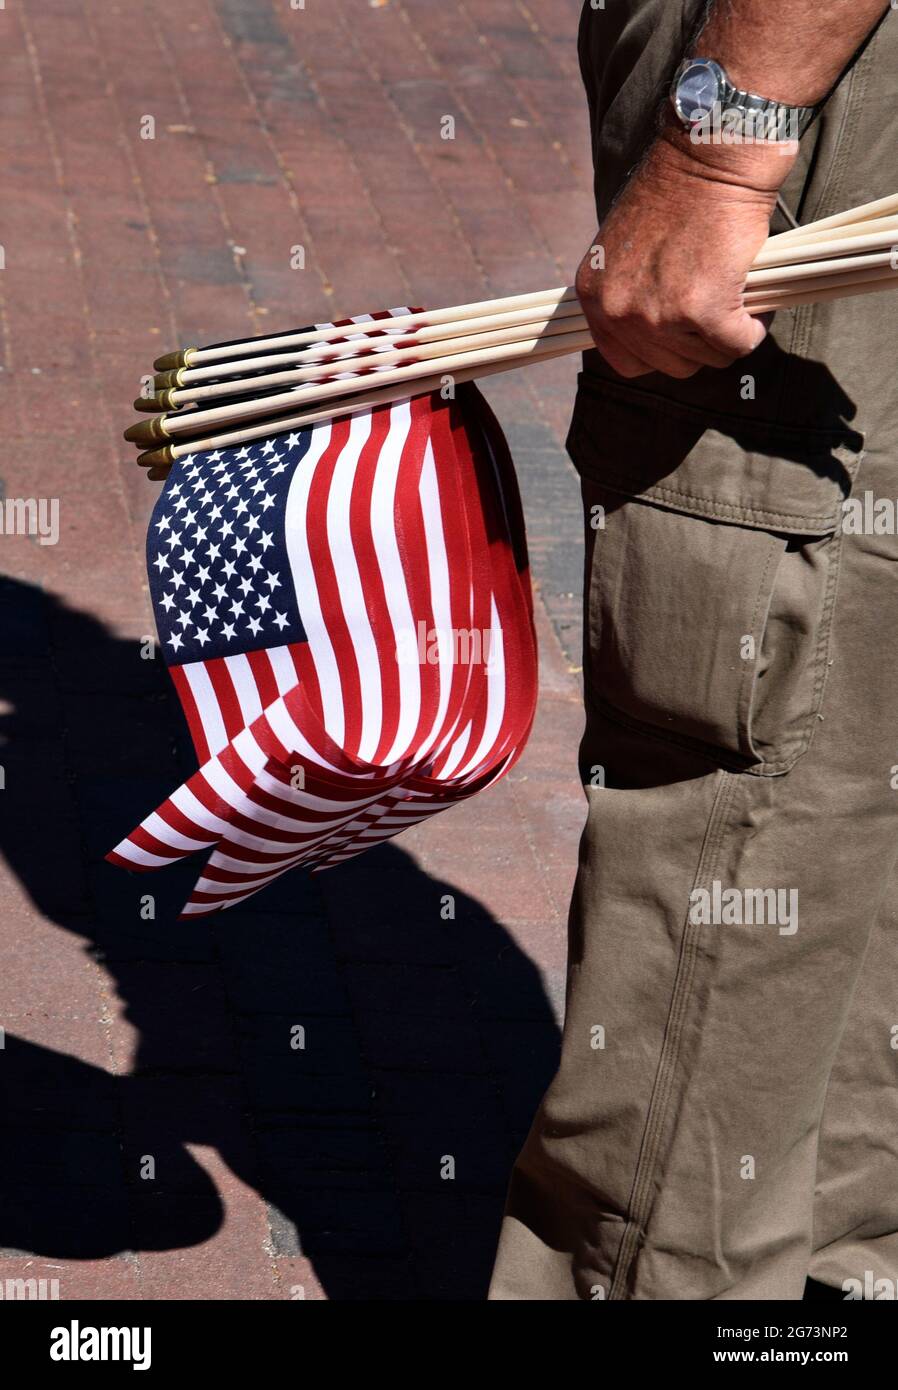 A man distributes small American flags at a Fourth of July classic car show in Santa Fe, New Mexico. Stock Photo